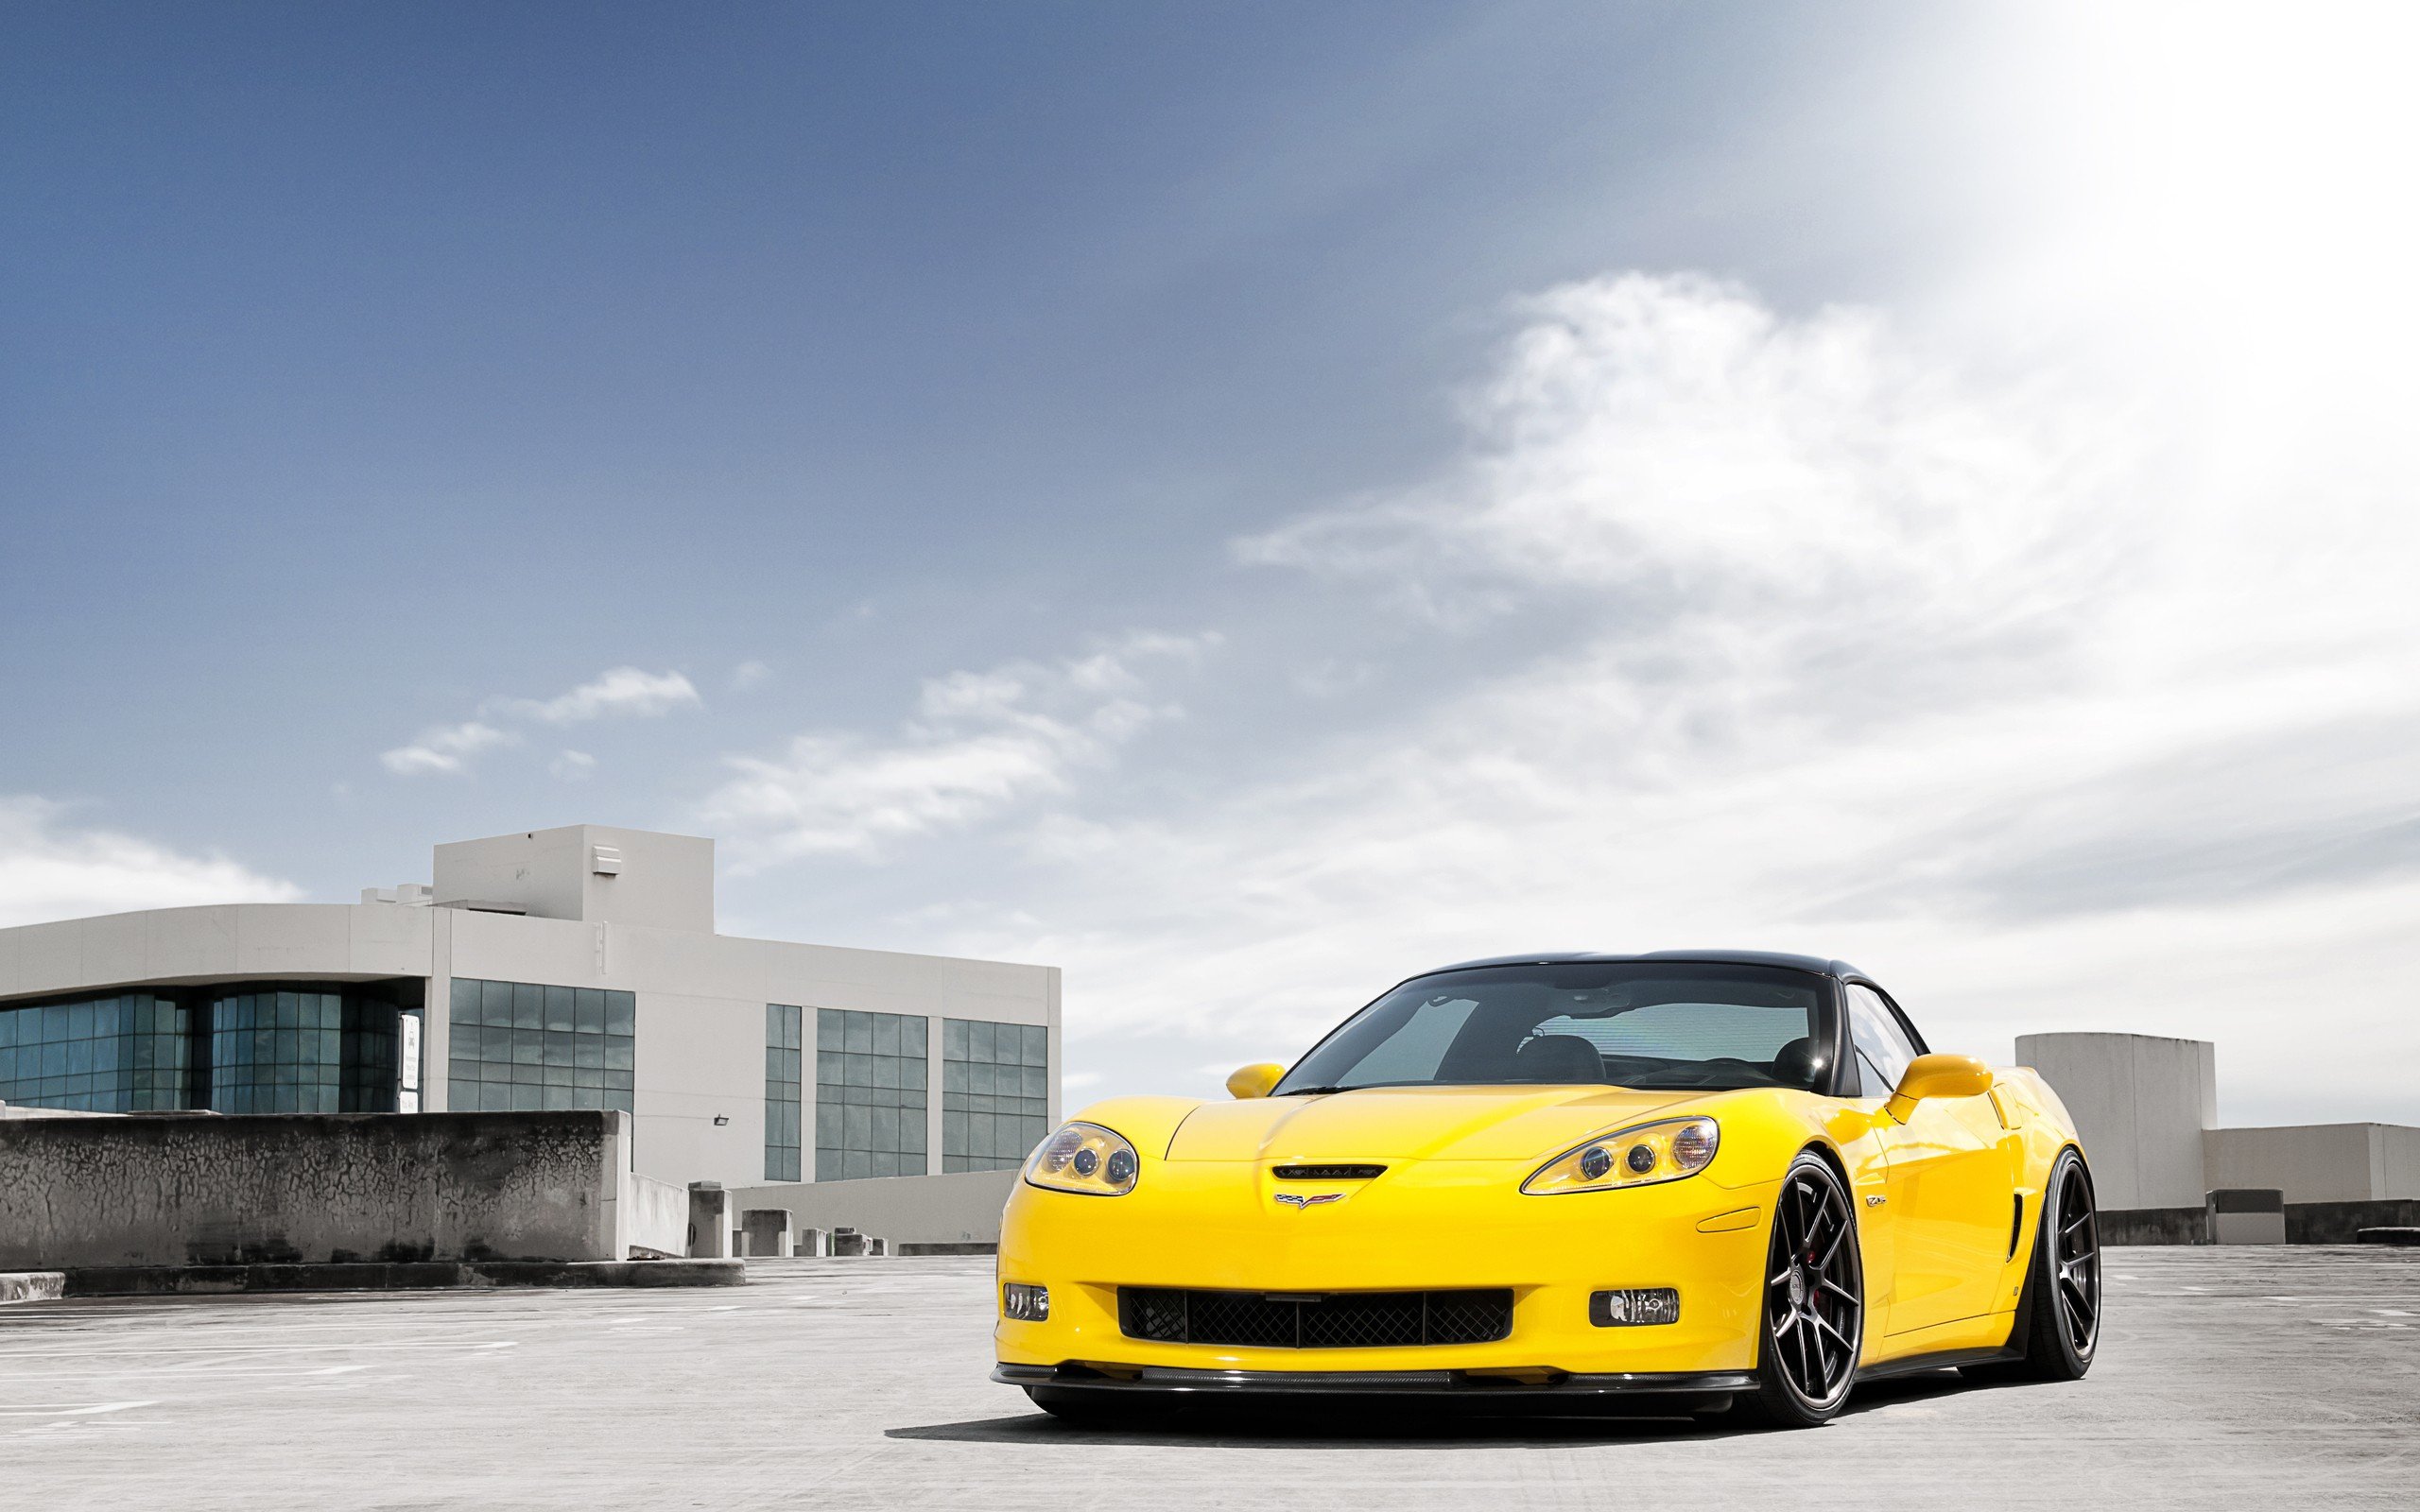 clouds, Cars, Vehicles, Supercars, Tuning, Chevrolet, Corvette, Wheels, Racing, Chevrolet, Corvette, Z06, Sports, Cars, Luxury, Sport, Cars, Yellow, Cars, Speed, Automobiles Wallpaper